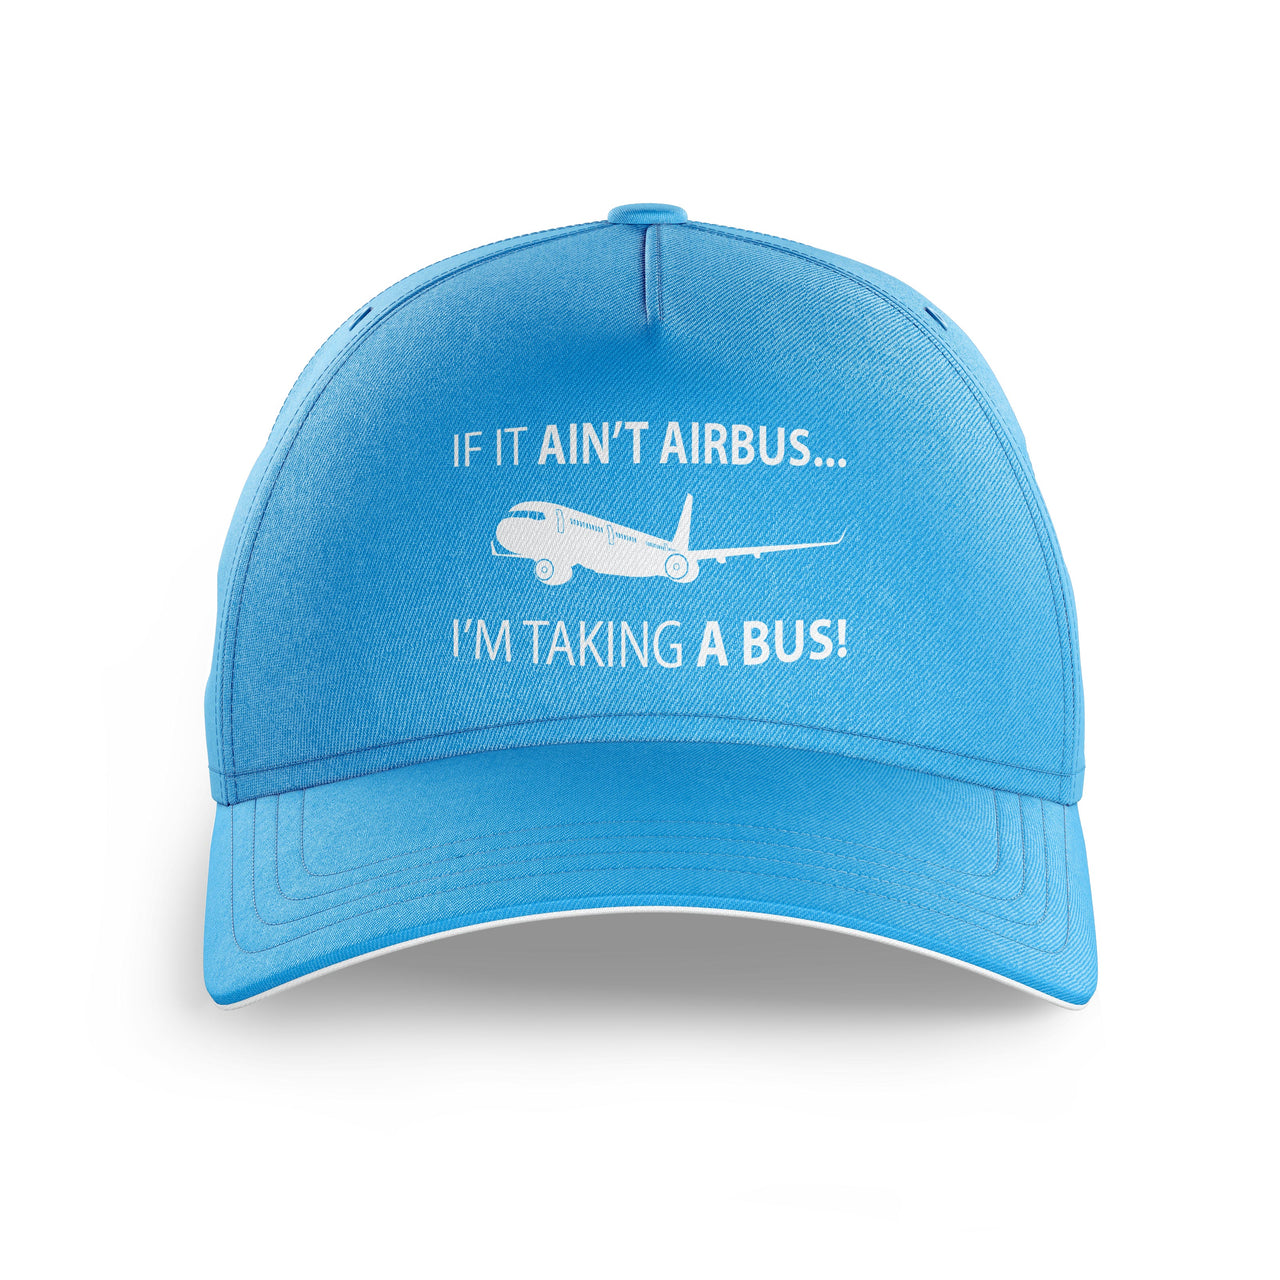 If It Ain't Airbus I'm Taking A Bus Printed Hats